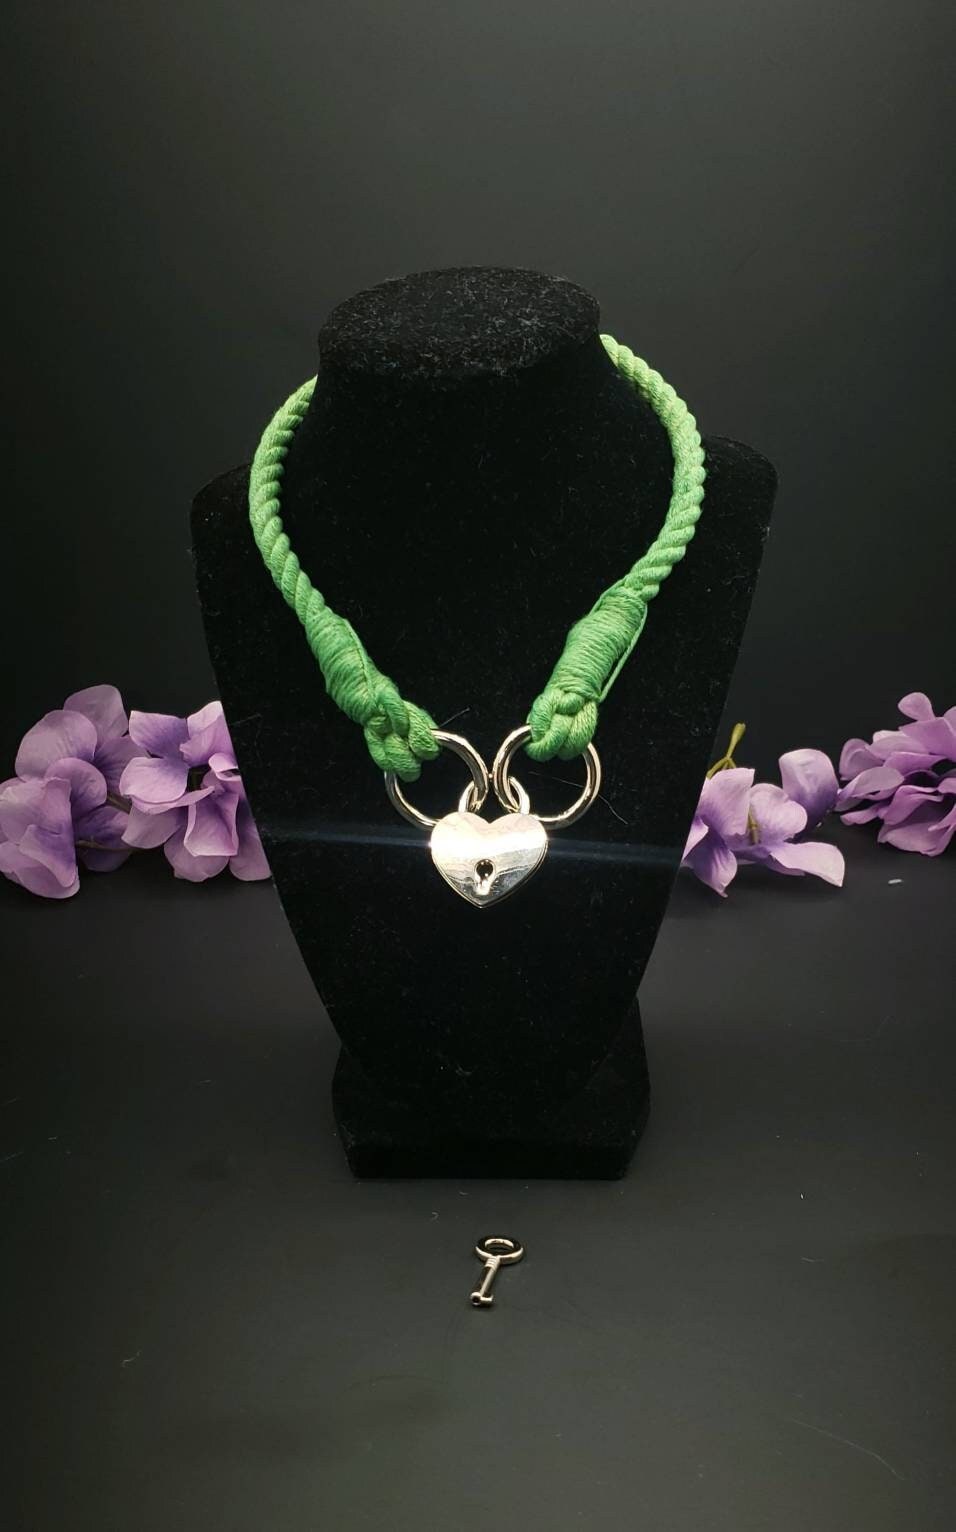 Peacock Green Heart Locking Collar - BDSM Rope Choker - Submissive Cotton Collar | Novelty Choker Accessory for Roleplay